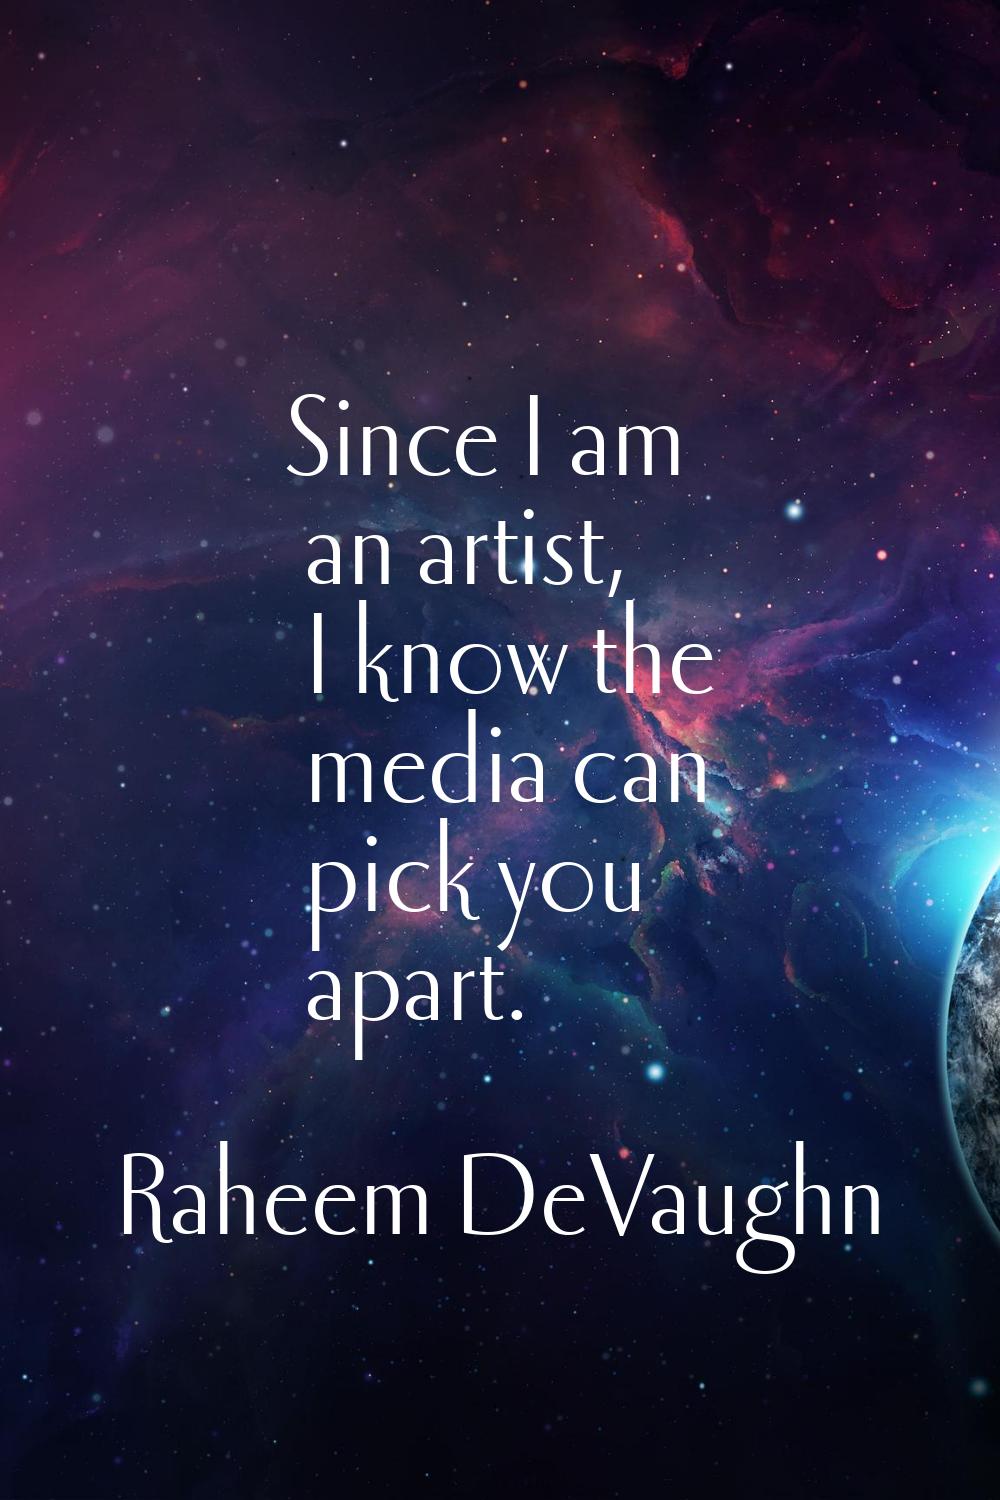 Since I am an artist, I know the media can pick you apart.